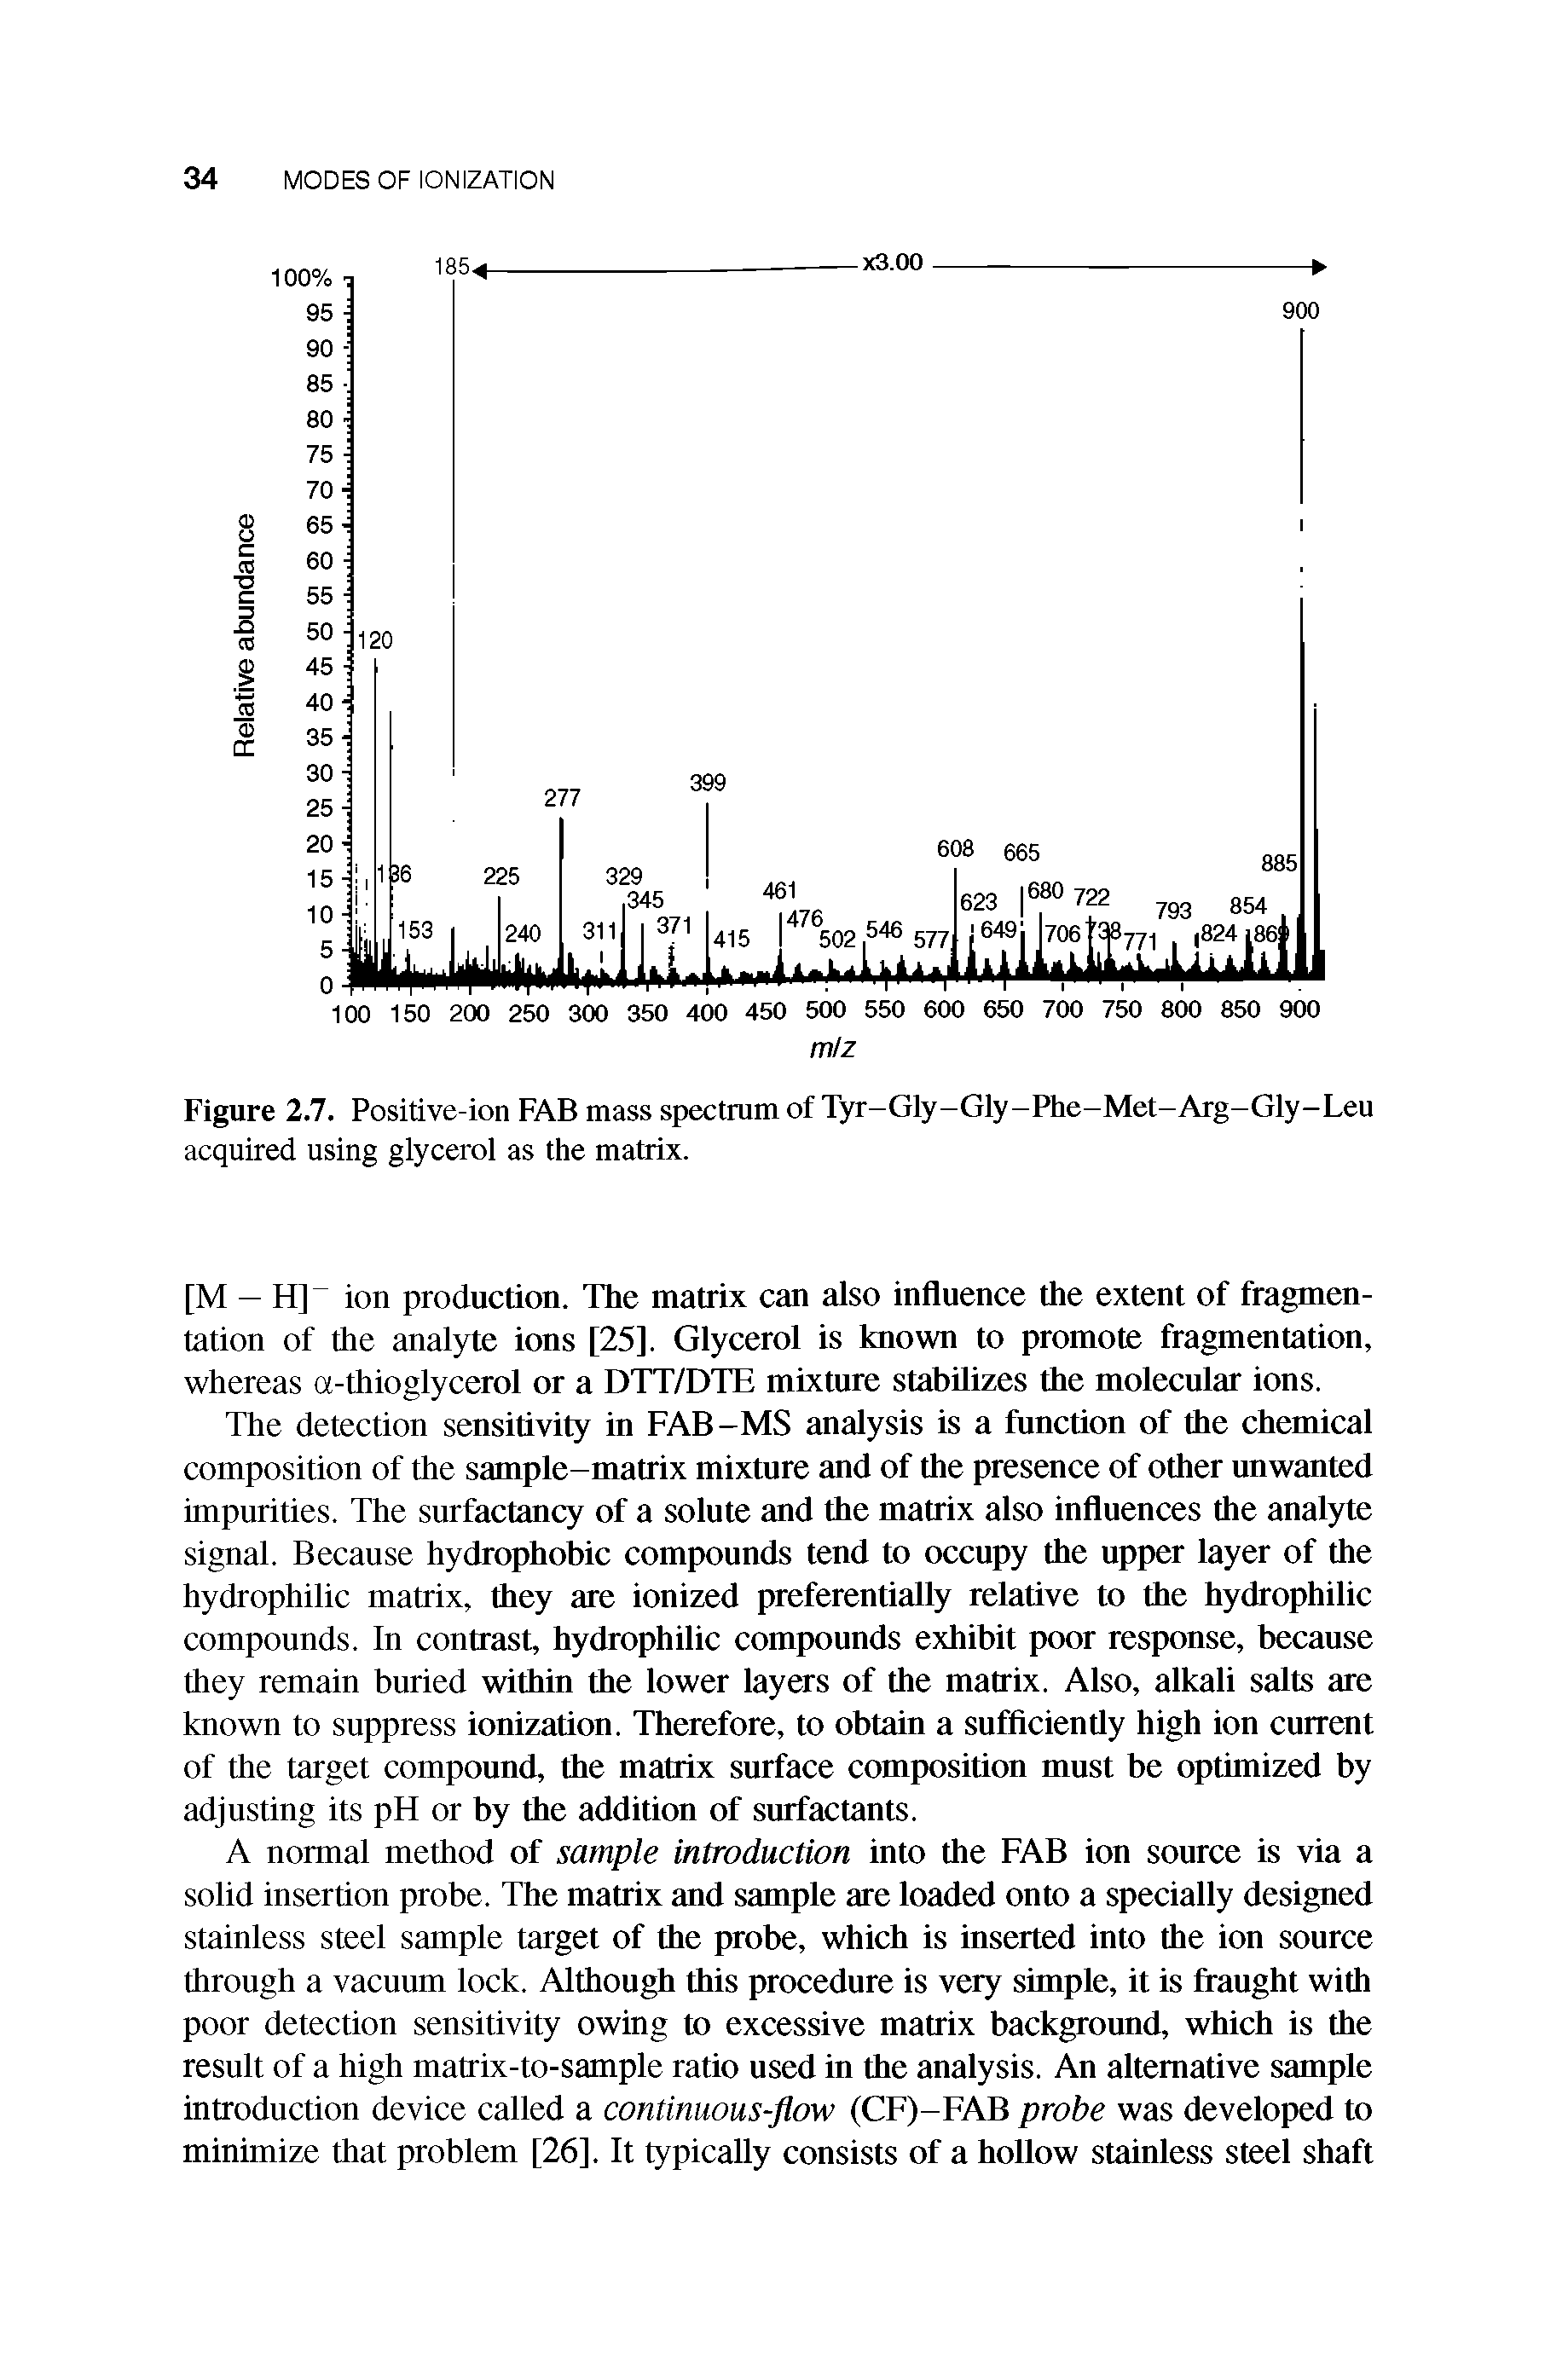 Figure 2.7. Positive-ion FAB mass spectrum of Tyr-Gly-Gly-Phe-Met-Arg-Gly-Leu acquired using glycerol as the matrix.